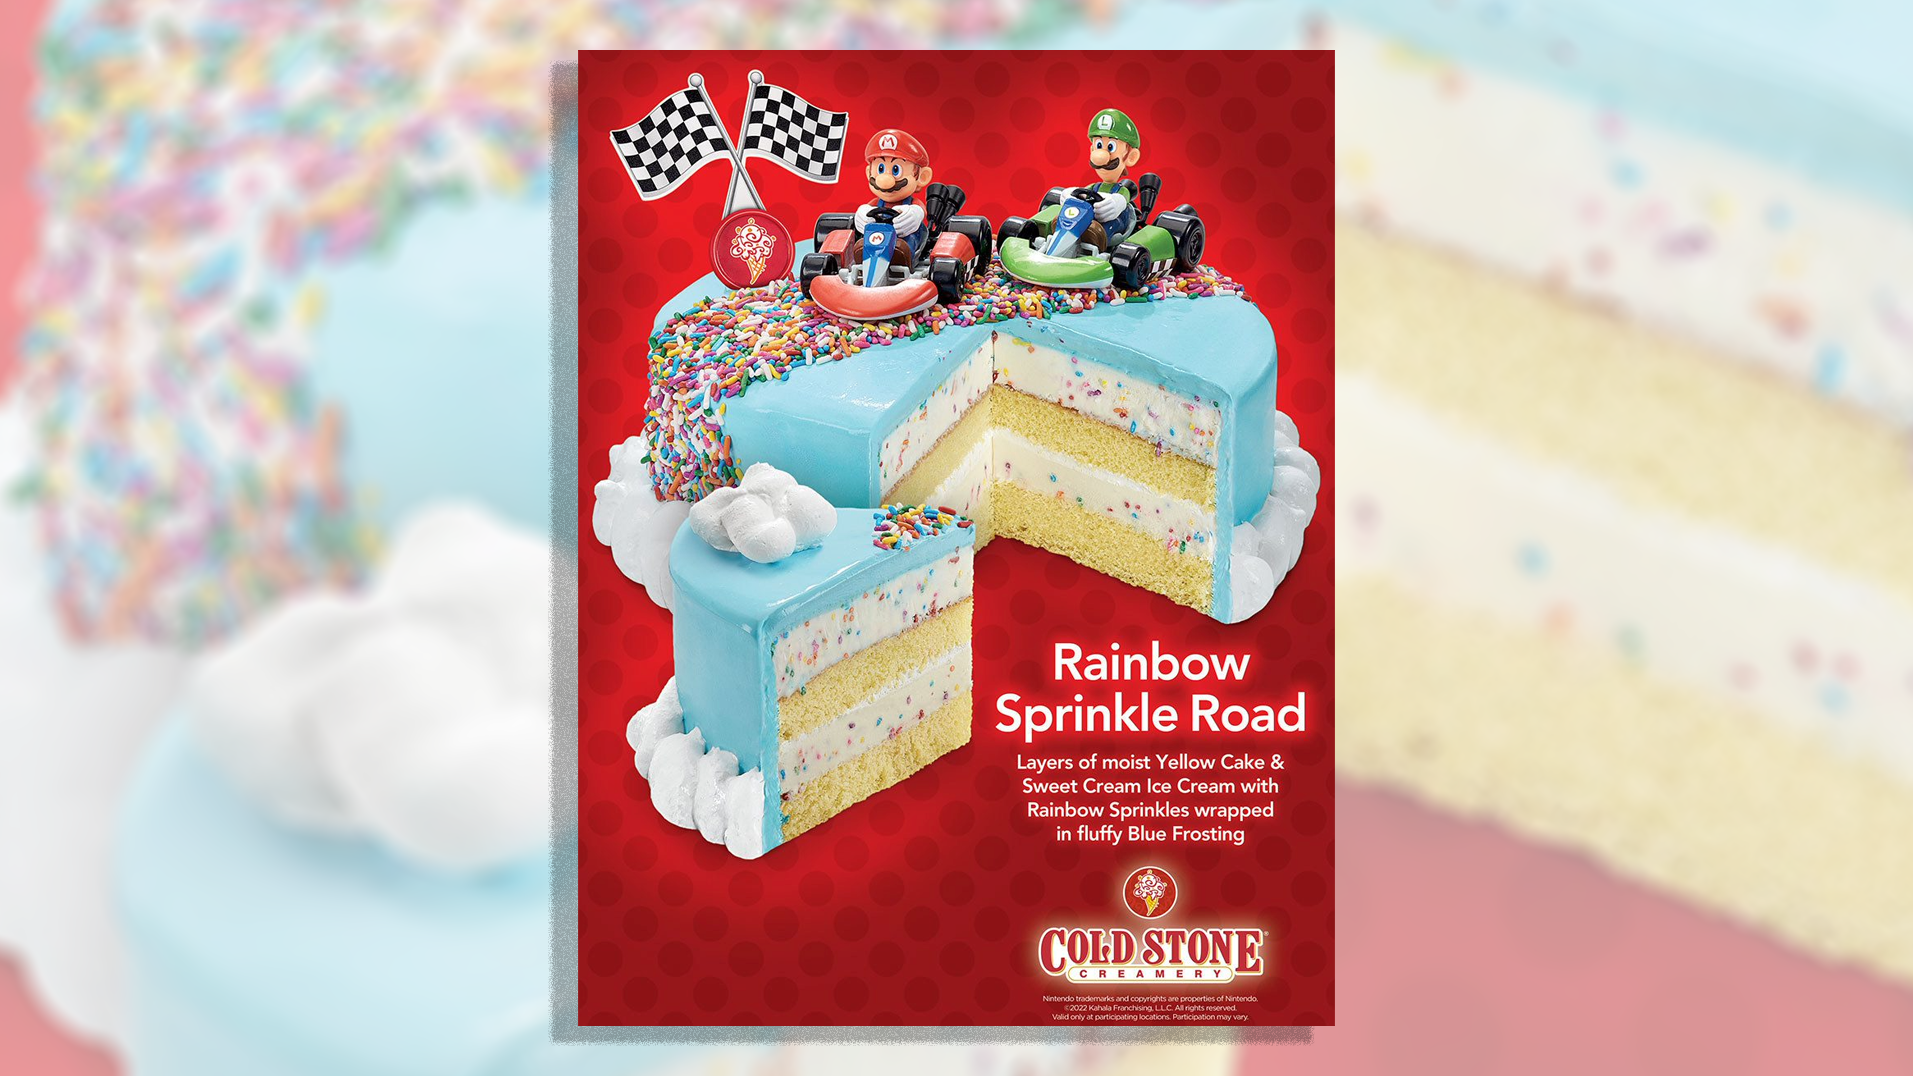 Cold Stone Creamery and Nintendo Team Up Again to Celebrate the Summer